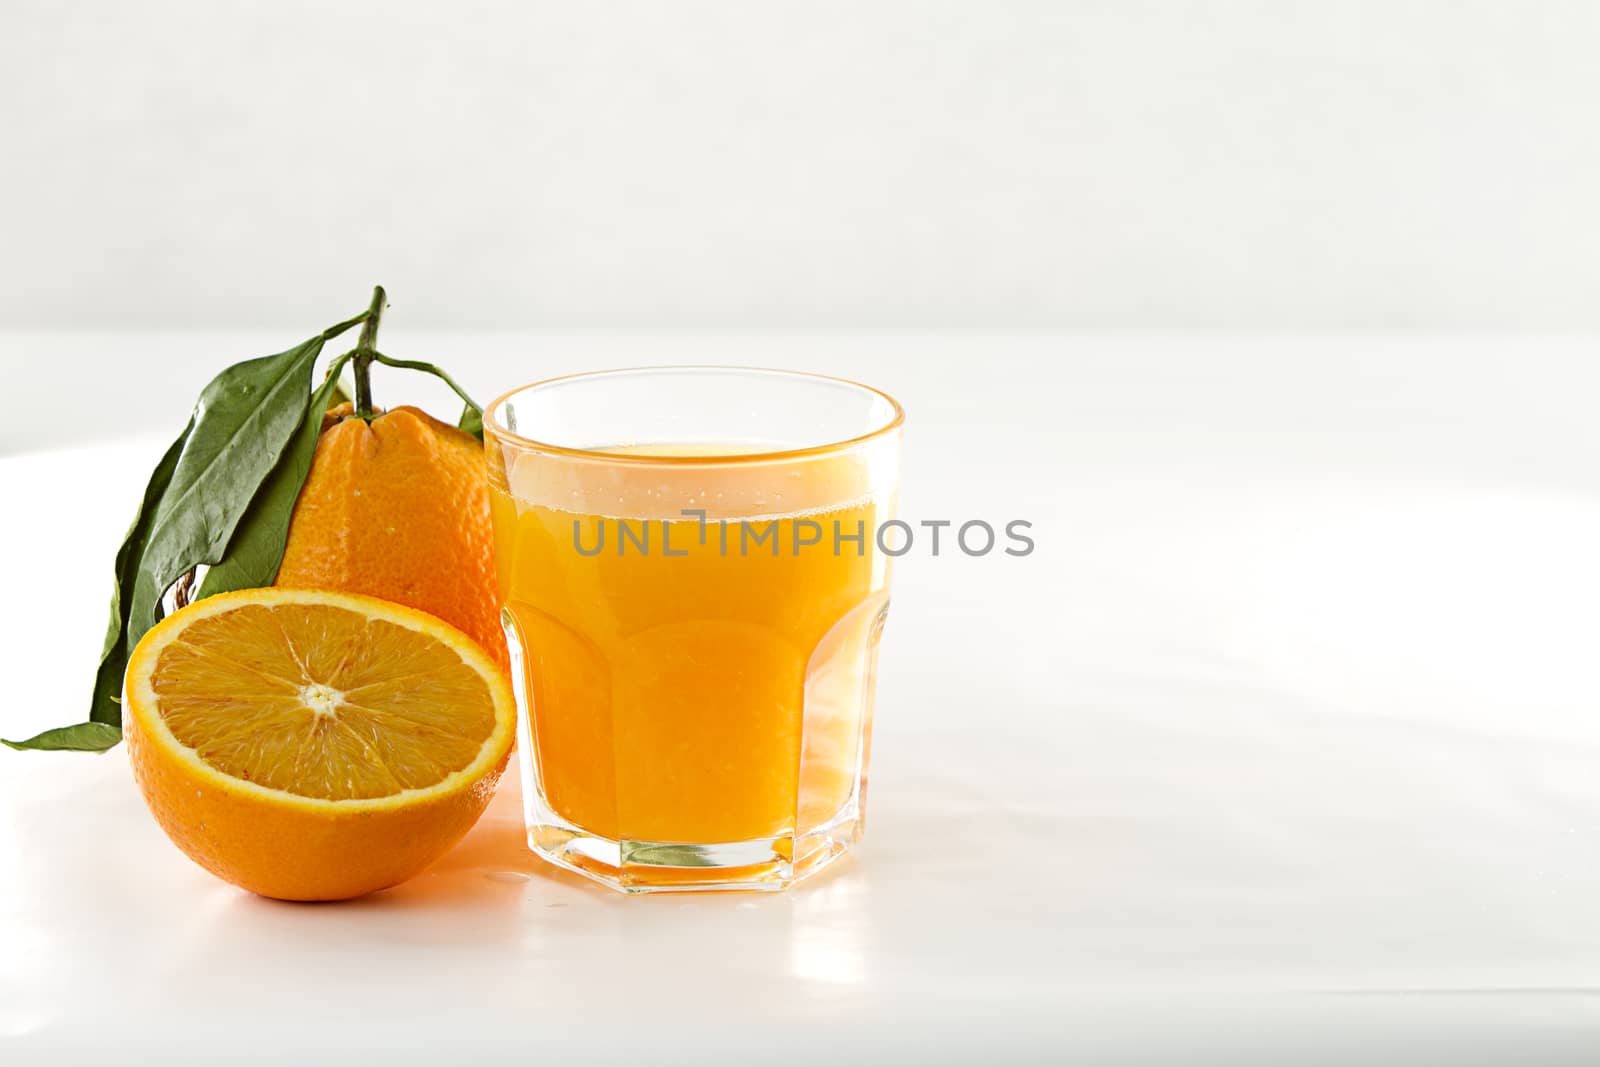 An inviting glass full of orange juice, a orange divided in two and a whole one with leaf on a white background